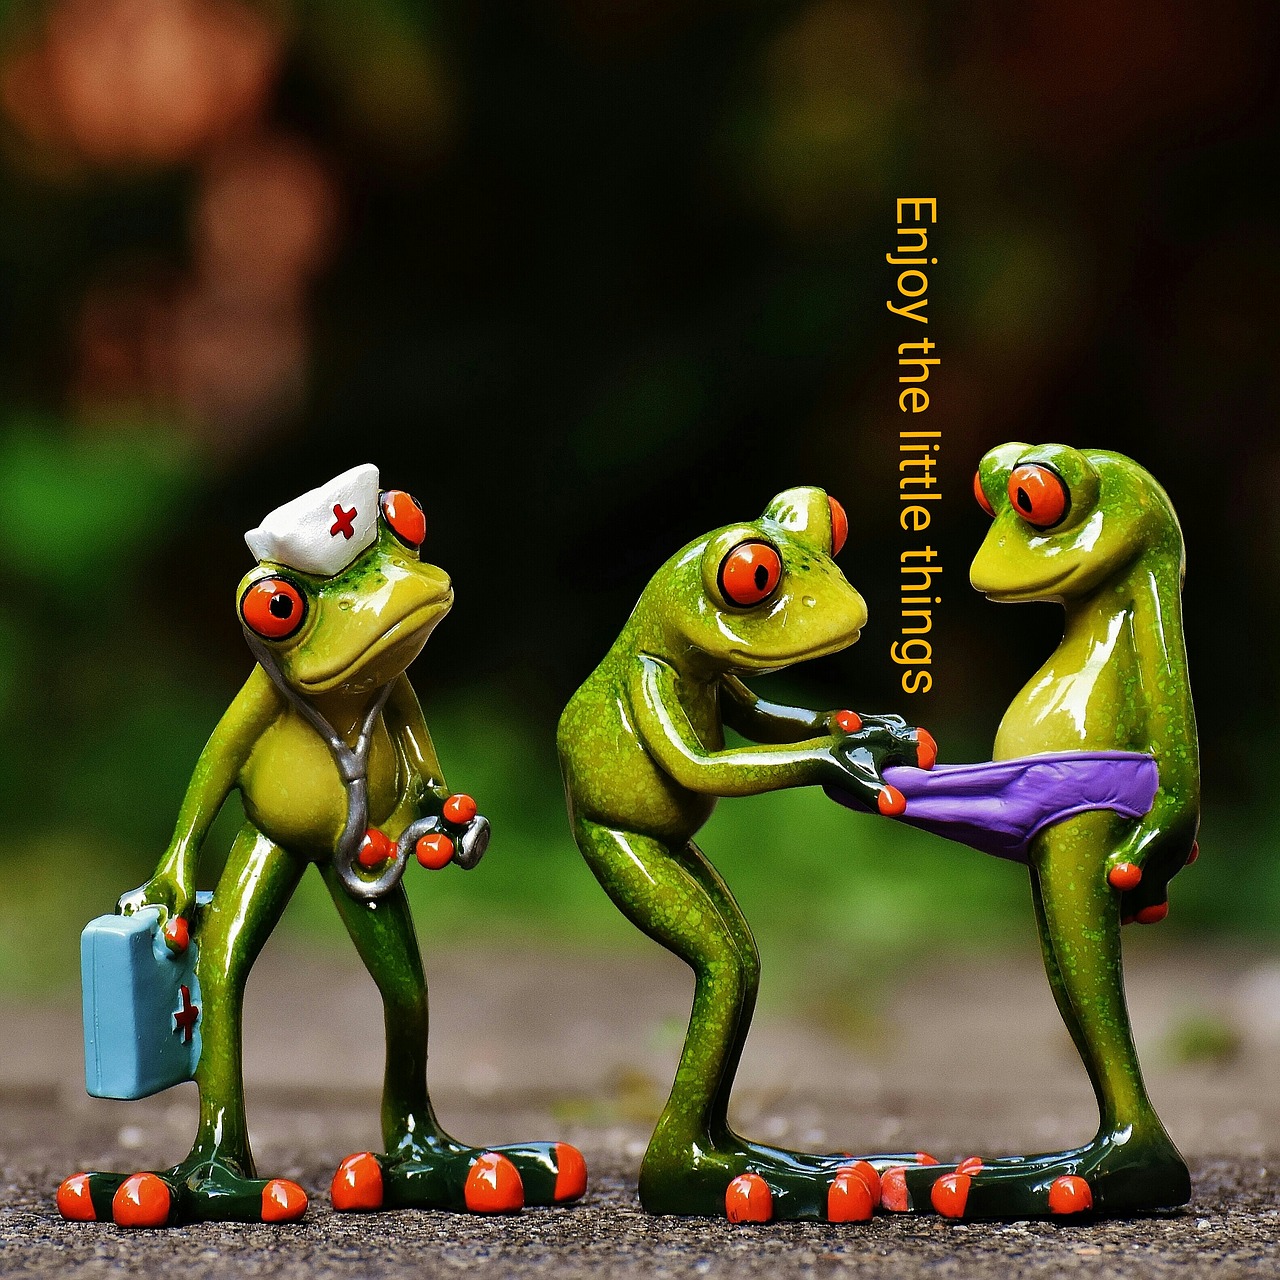 frogs enjoy the little things funny free photo